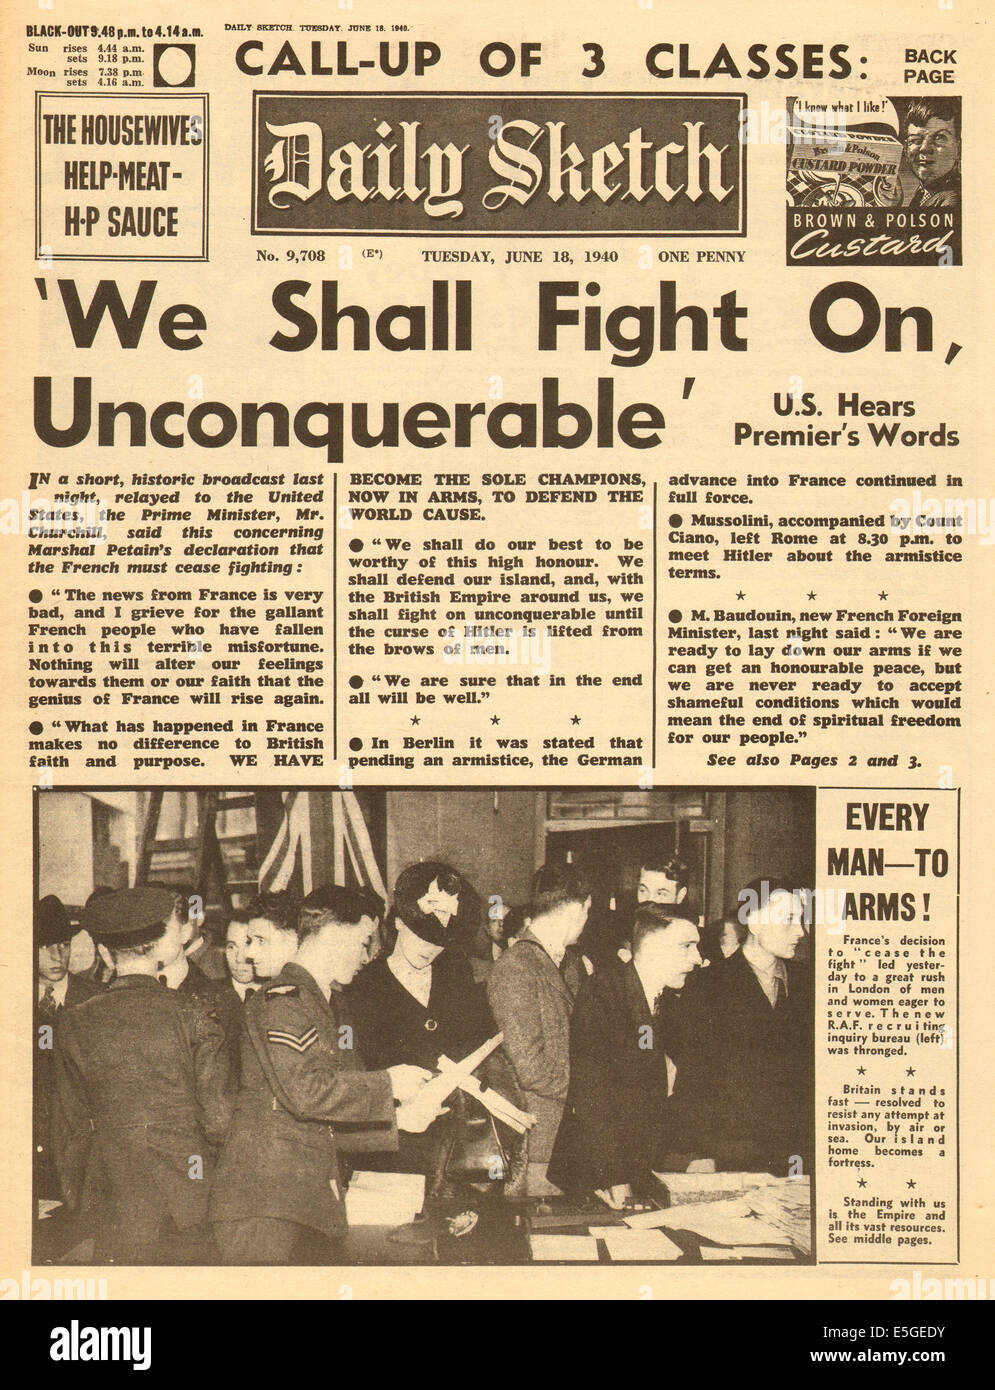 1940 Daily Sketch front page reporting Winston Churchill's speech 'We Shall Fight On Unconquerable' during the Battle of Britain Stock Photo